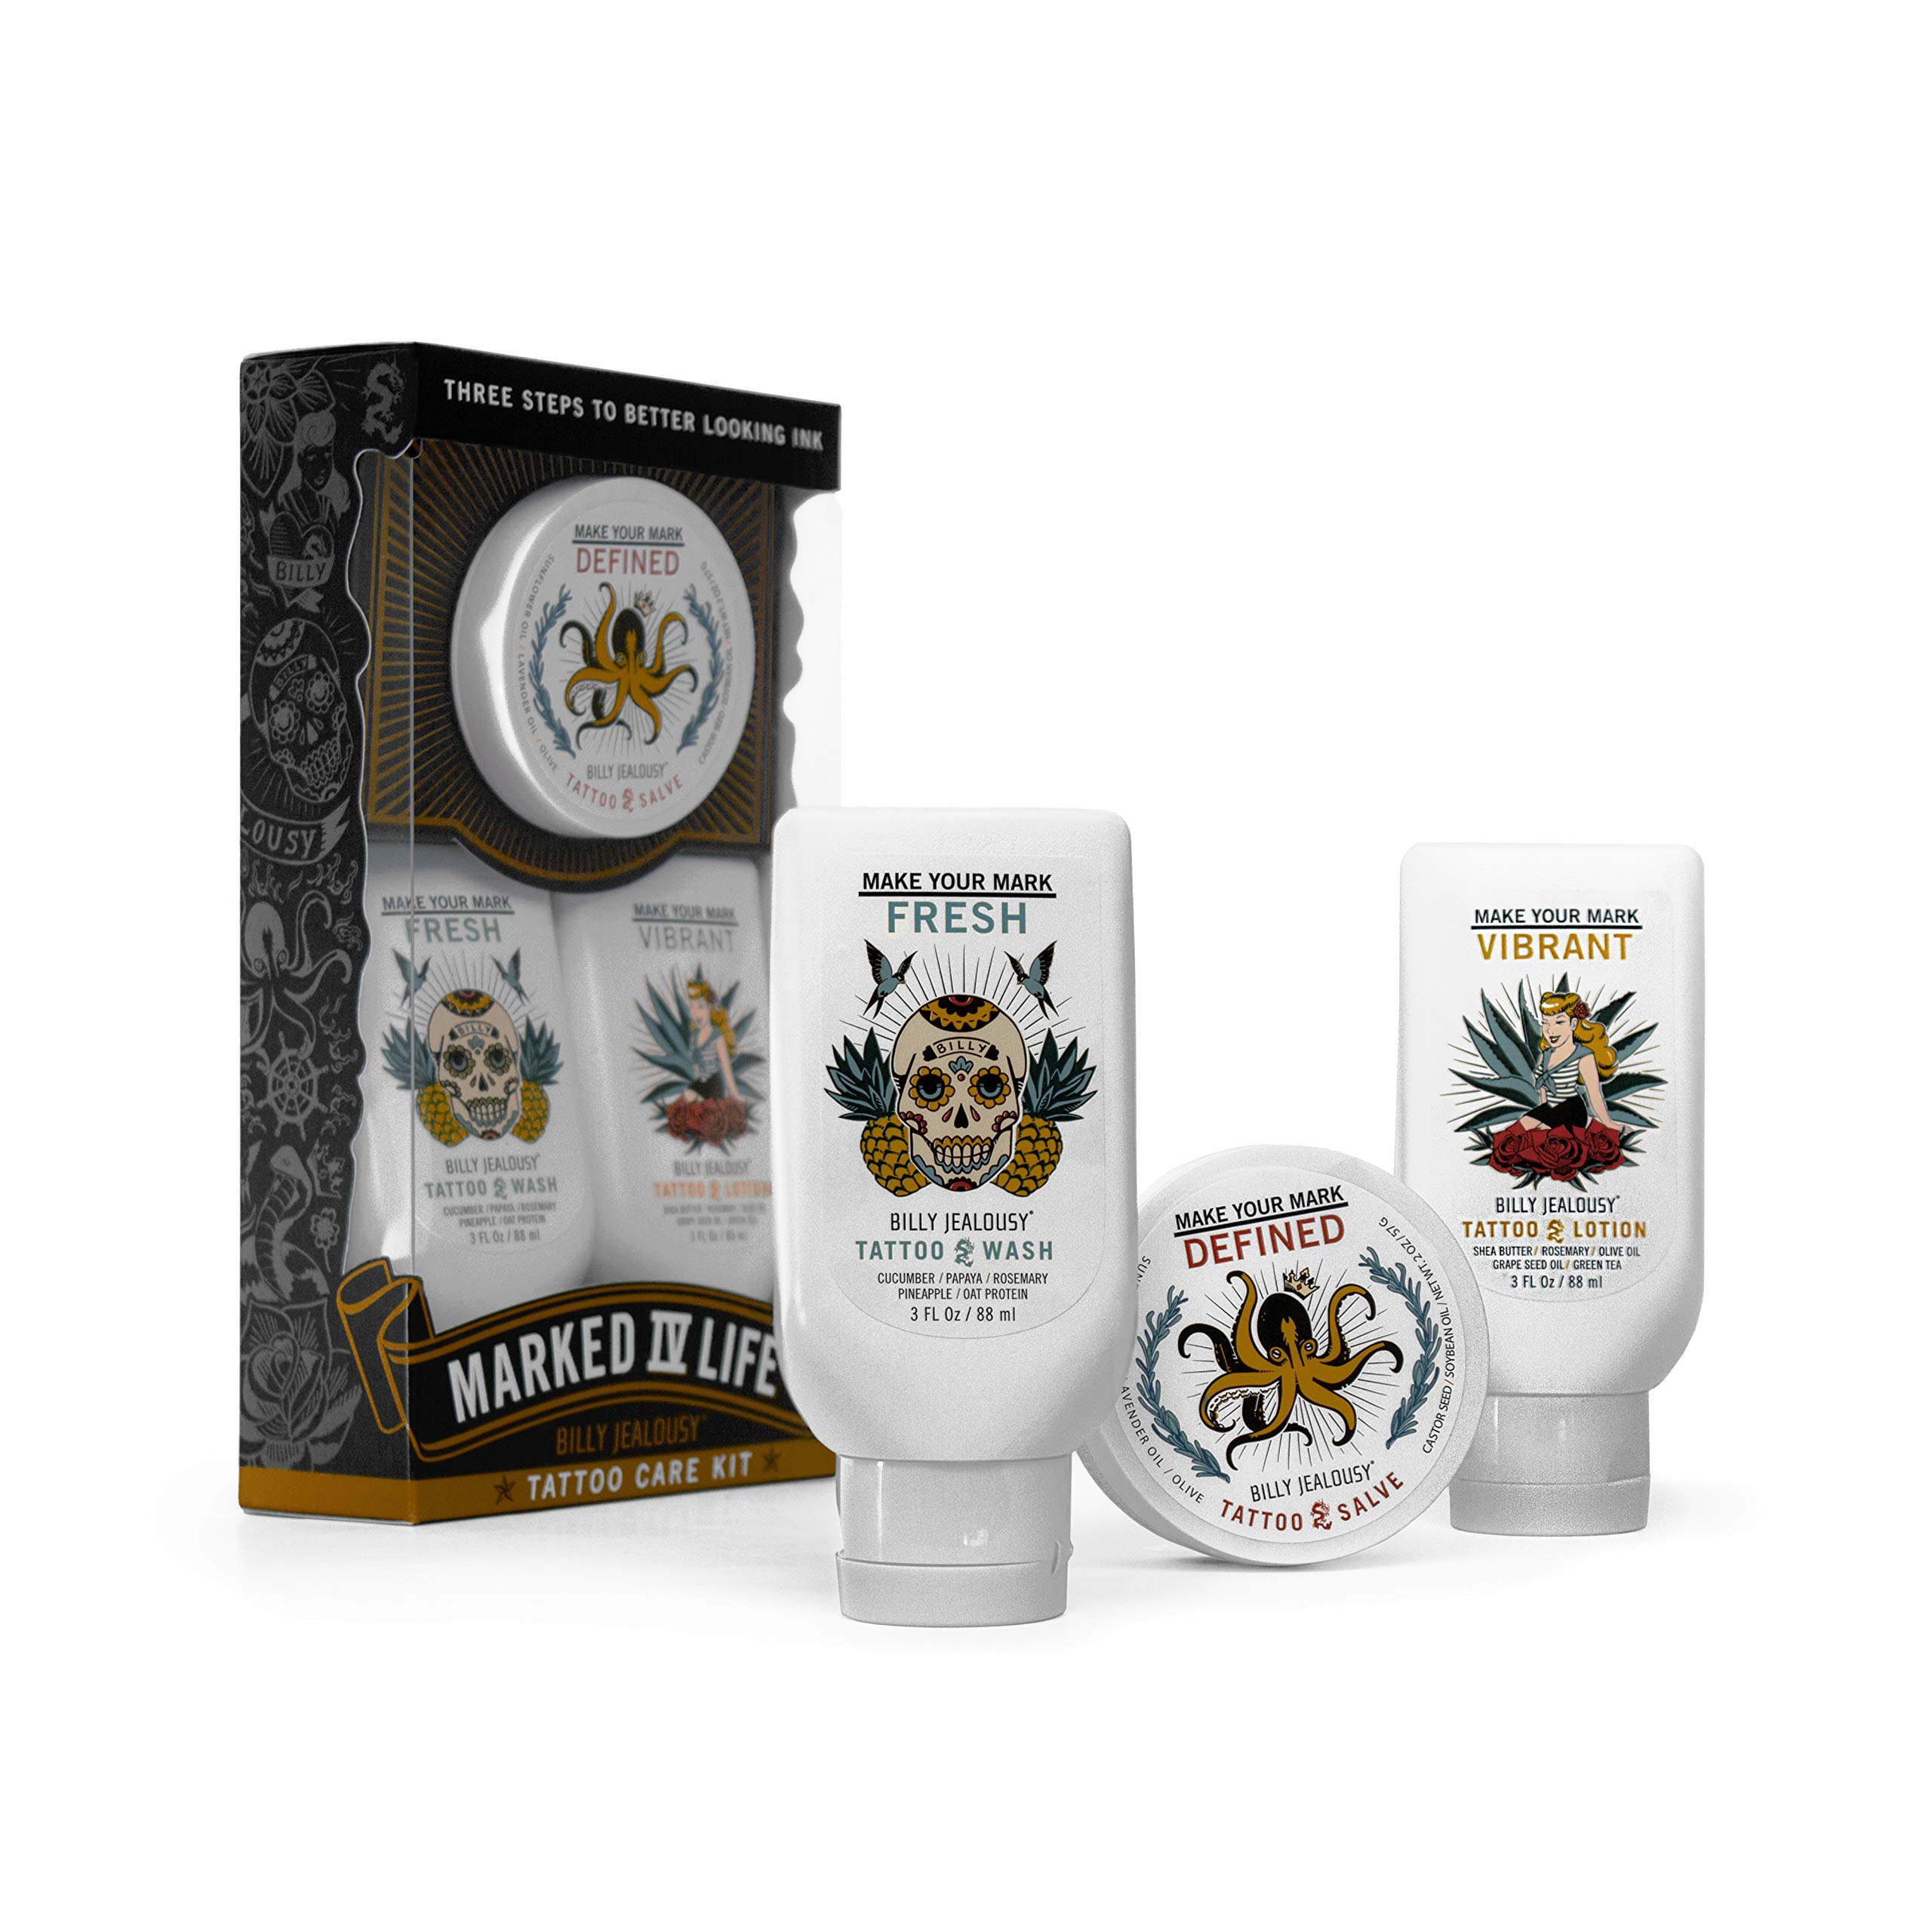 Billy Jealousy Marked IV Life Complete Tattoo Care Kit, Includes Tattoo Defining Aftercare Salve, Brightening Tattoo Wash and Moisturizing Tattoo Lotion, Travel Friendly Size